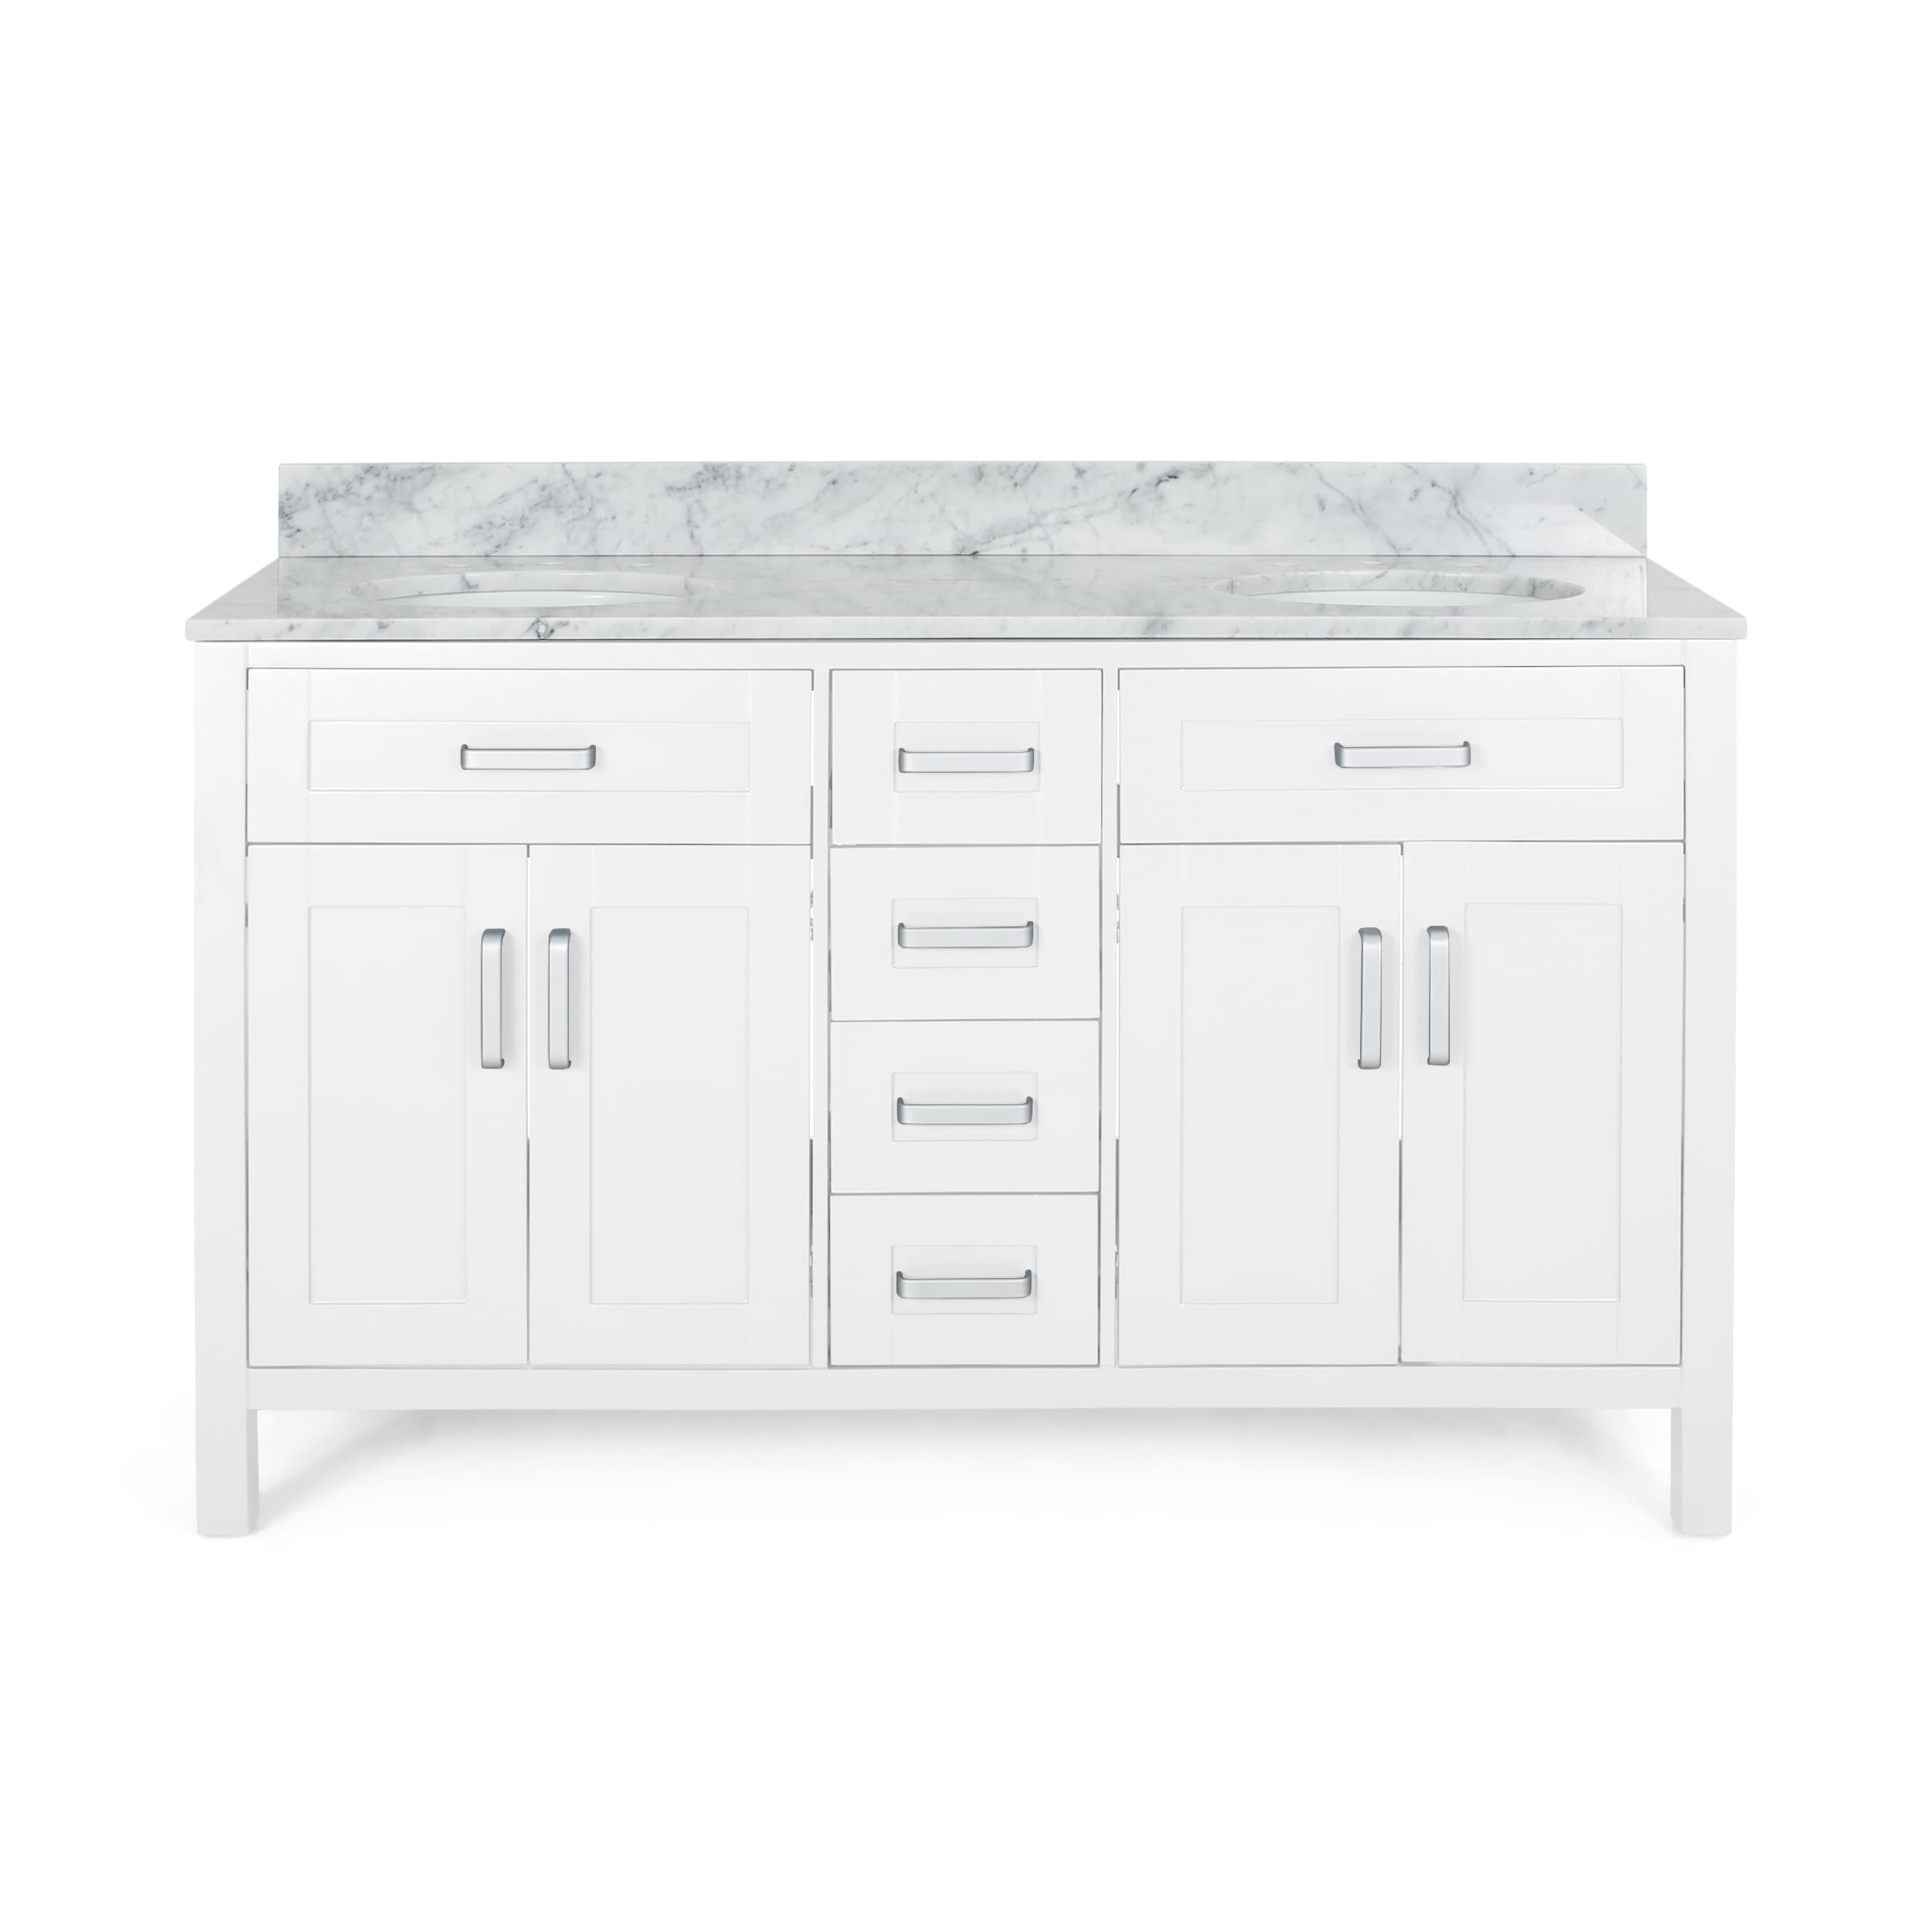 Best Selling Home Decor Greeley 60-in White Undermount Double Sink ...